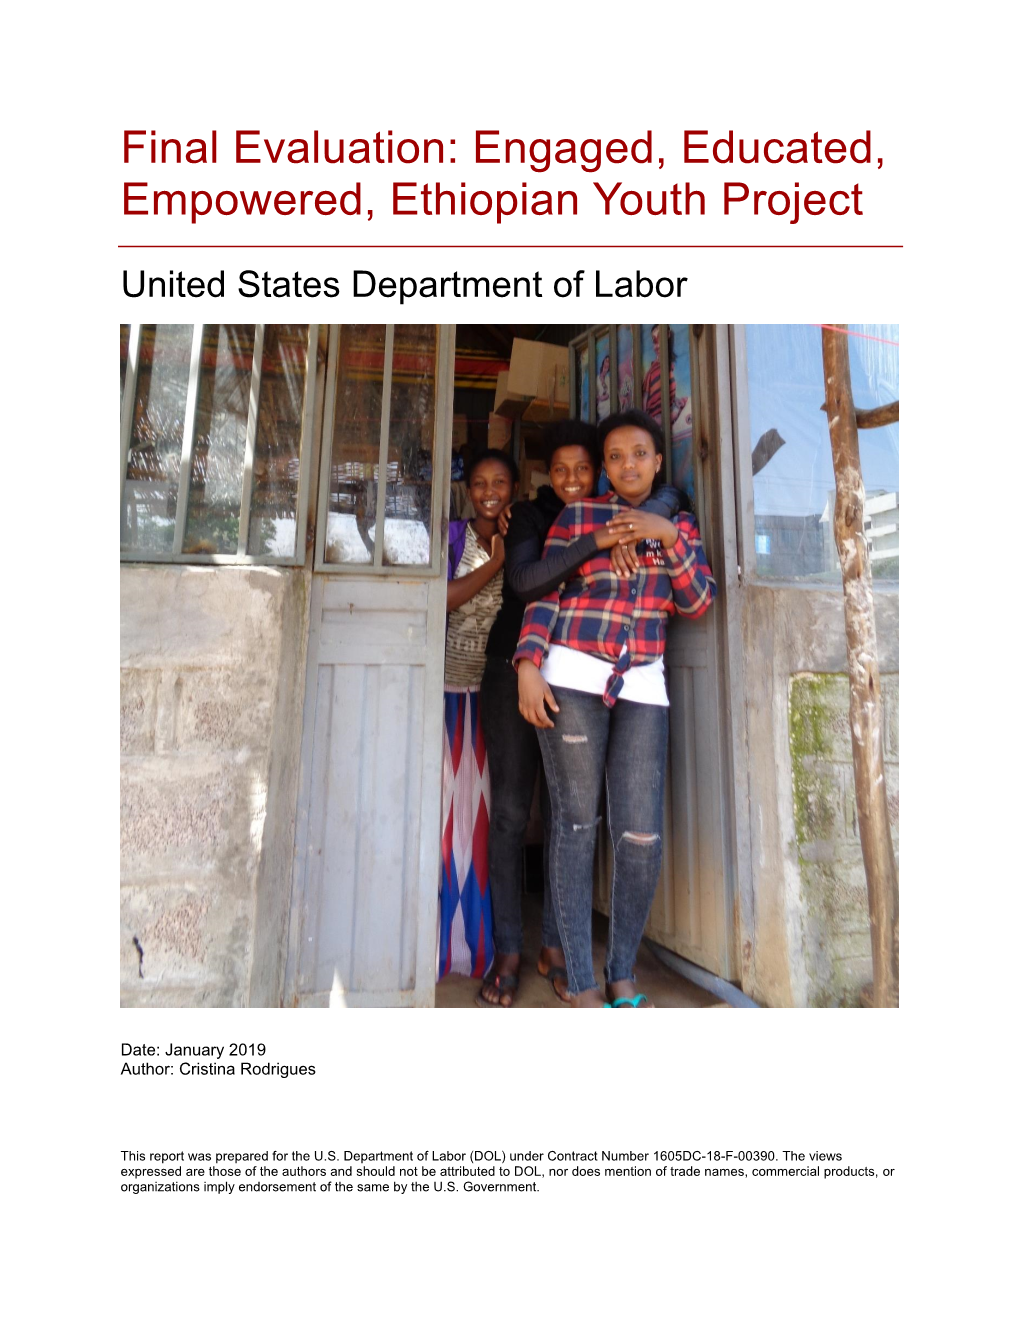 Final Evaluation: Engaged, Educated, Empowered, Ethiopian Youth Project